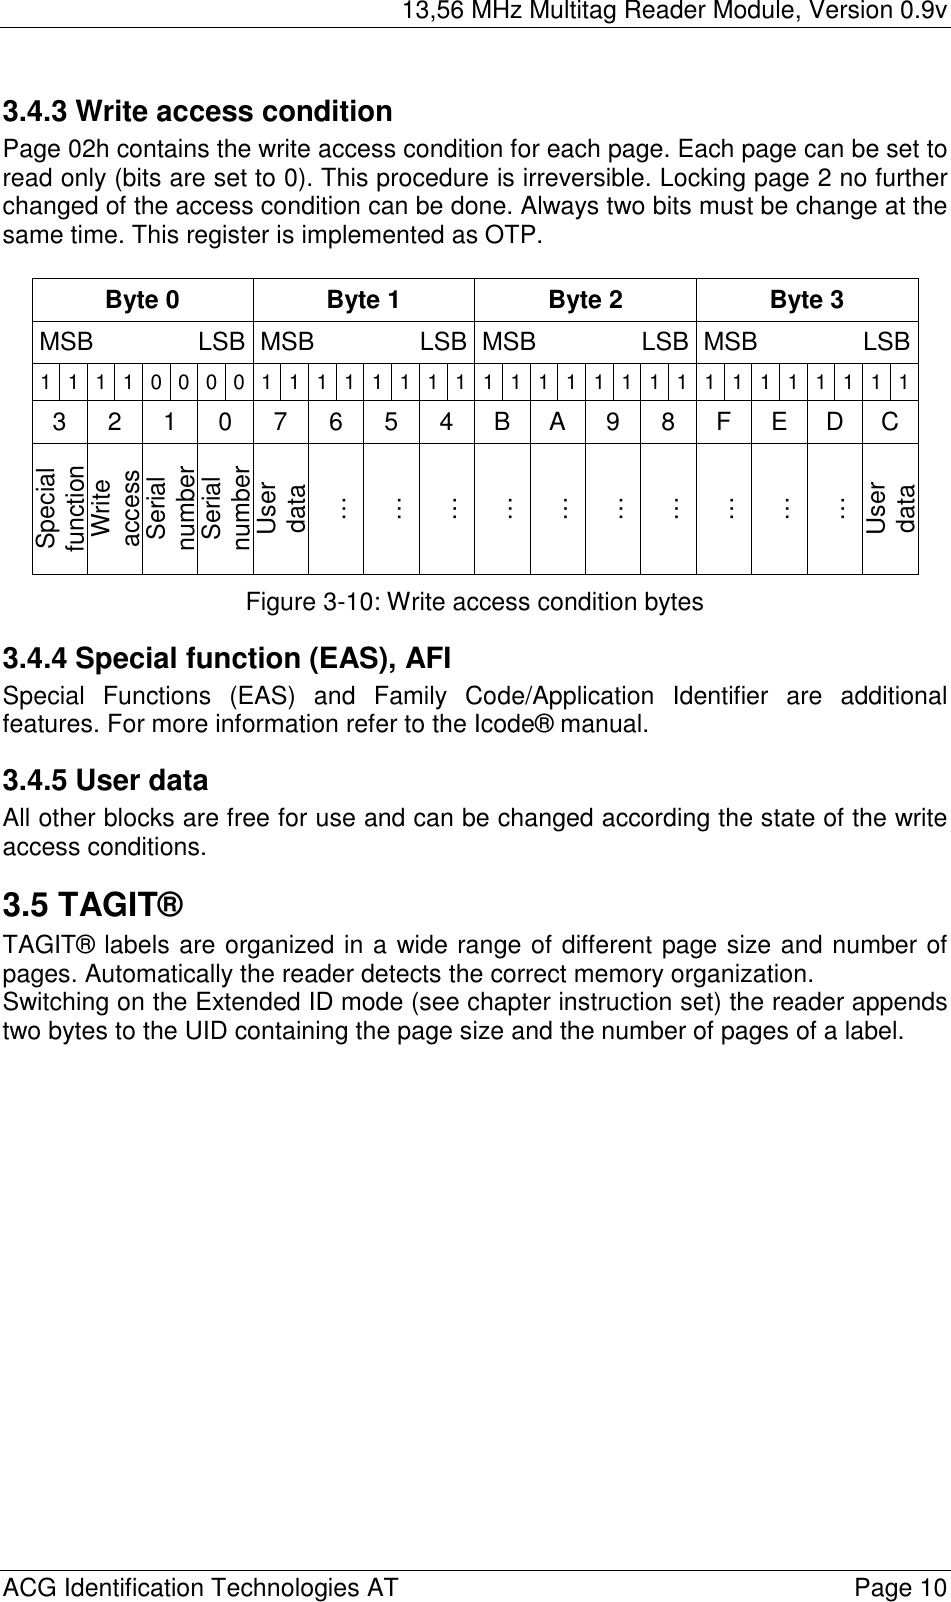 13,56 MHz Multitag Reader Module, Version 0.9v  ACG Identification Technologies AT    Page 10 3.4.3 Write access condition Page 02h contains the write access condition for each page. Each page can be set to read only (bits are set to 0). This procedure is irreversible. Locking page 2 no further changed of the access condition can be done. Always two bits must be change at the same time. This register is implemented as OTP.  Byte 0  Byte 1  Byte 2  Byte 3 MSB    LSB MSB    LSB MSB    LSB MSB    LSB1 1 1 1 0 0 0 0 1 1 1 1 11111111111111 1 1 1 1 113 2 1 0 7 6 5 4 B A 9 8 F E D C Special function Write access Serial number Serial number User data … … … … … … … … … … User data Figure 3-10: Write access condition bytes 3.4.4 Special function (EAS), AFI Special Functions (EAS) and Family Code/Application Identifier are additional features. For more information refer to the Icode® manual. 3.4.5 User data All other blocks are free for use and can be changed according the state of the write access conditions. 3.5 TAGIT® TAGIT® labels are organized in a wide range of different page size and number of pages. Automatically the reader detects the correct memory organization. Switching on the Extended ID mode (see chapter instruction set) the reader appends two bytes to the UID containing the page size and the number of pages of a label.  